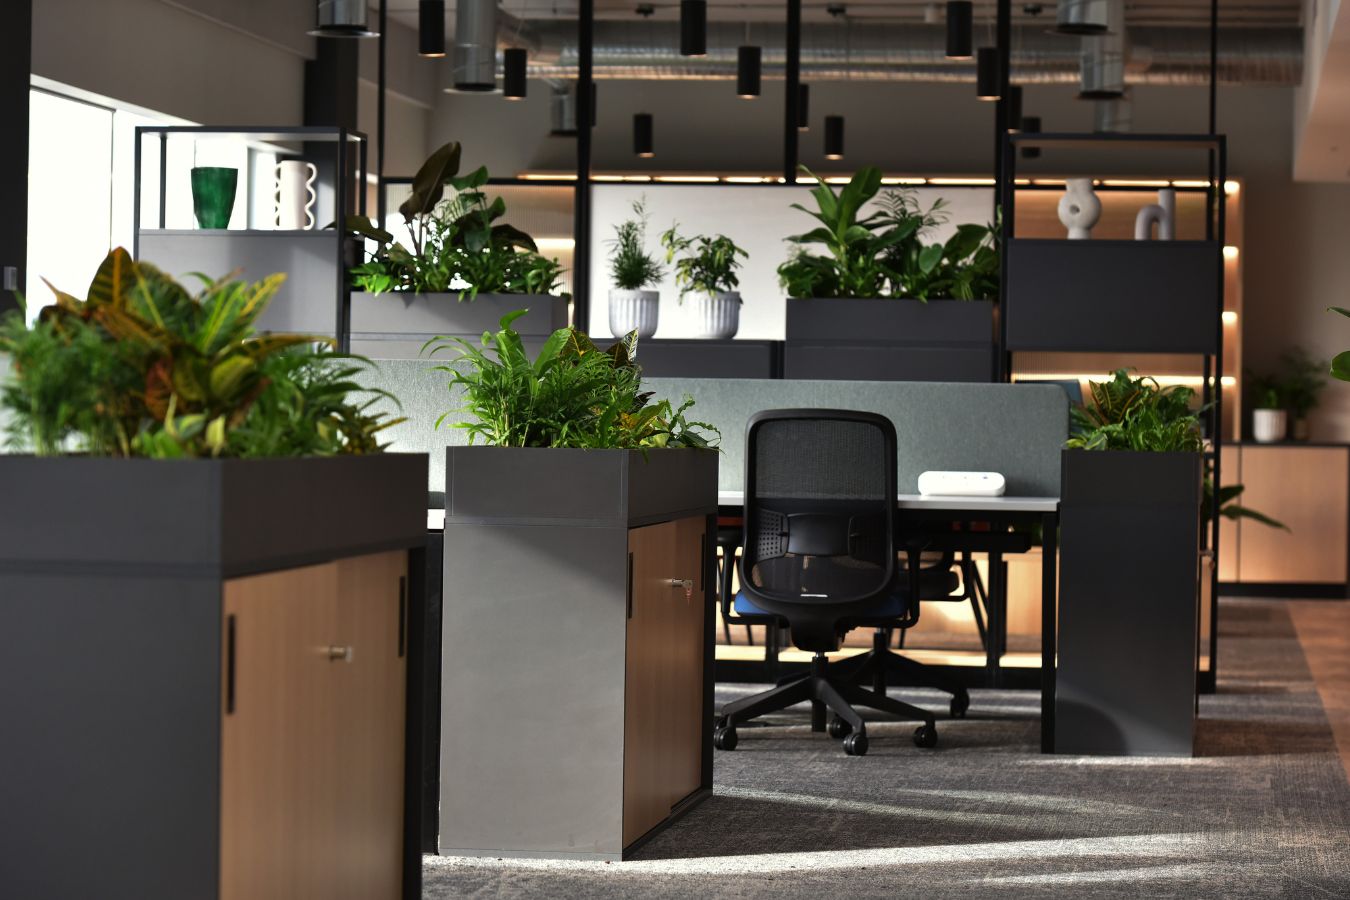 Modern ornaments decorated sparsely around biophilic office